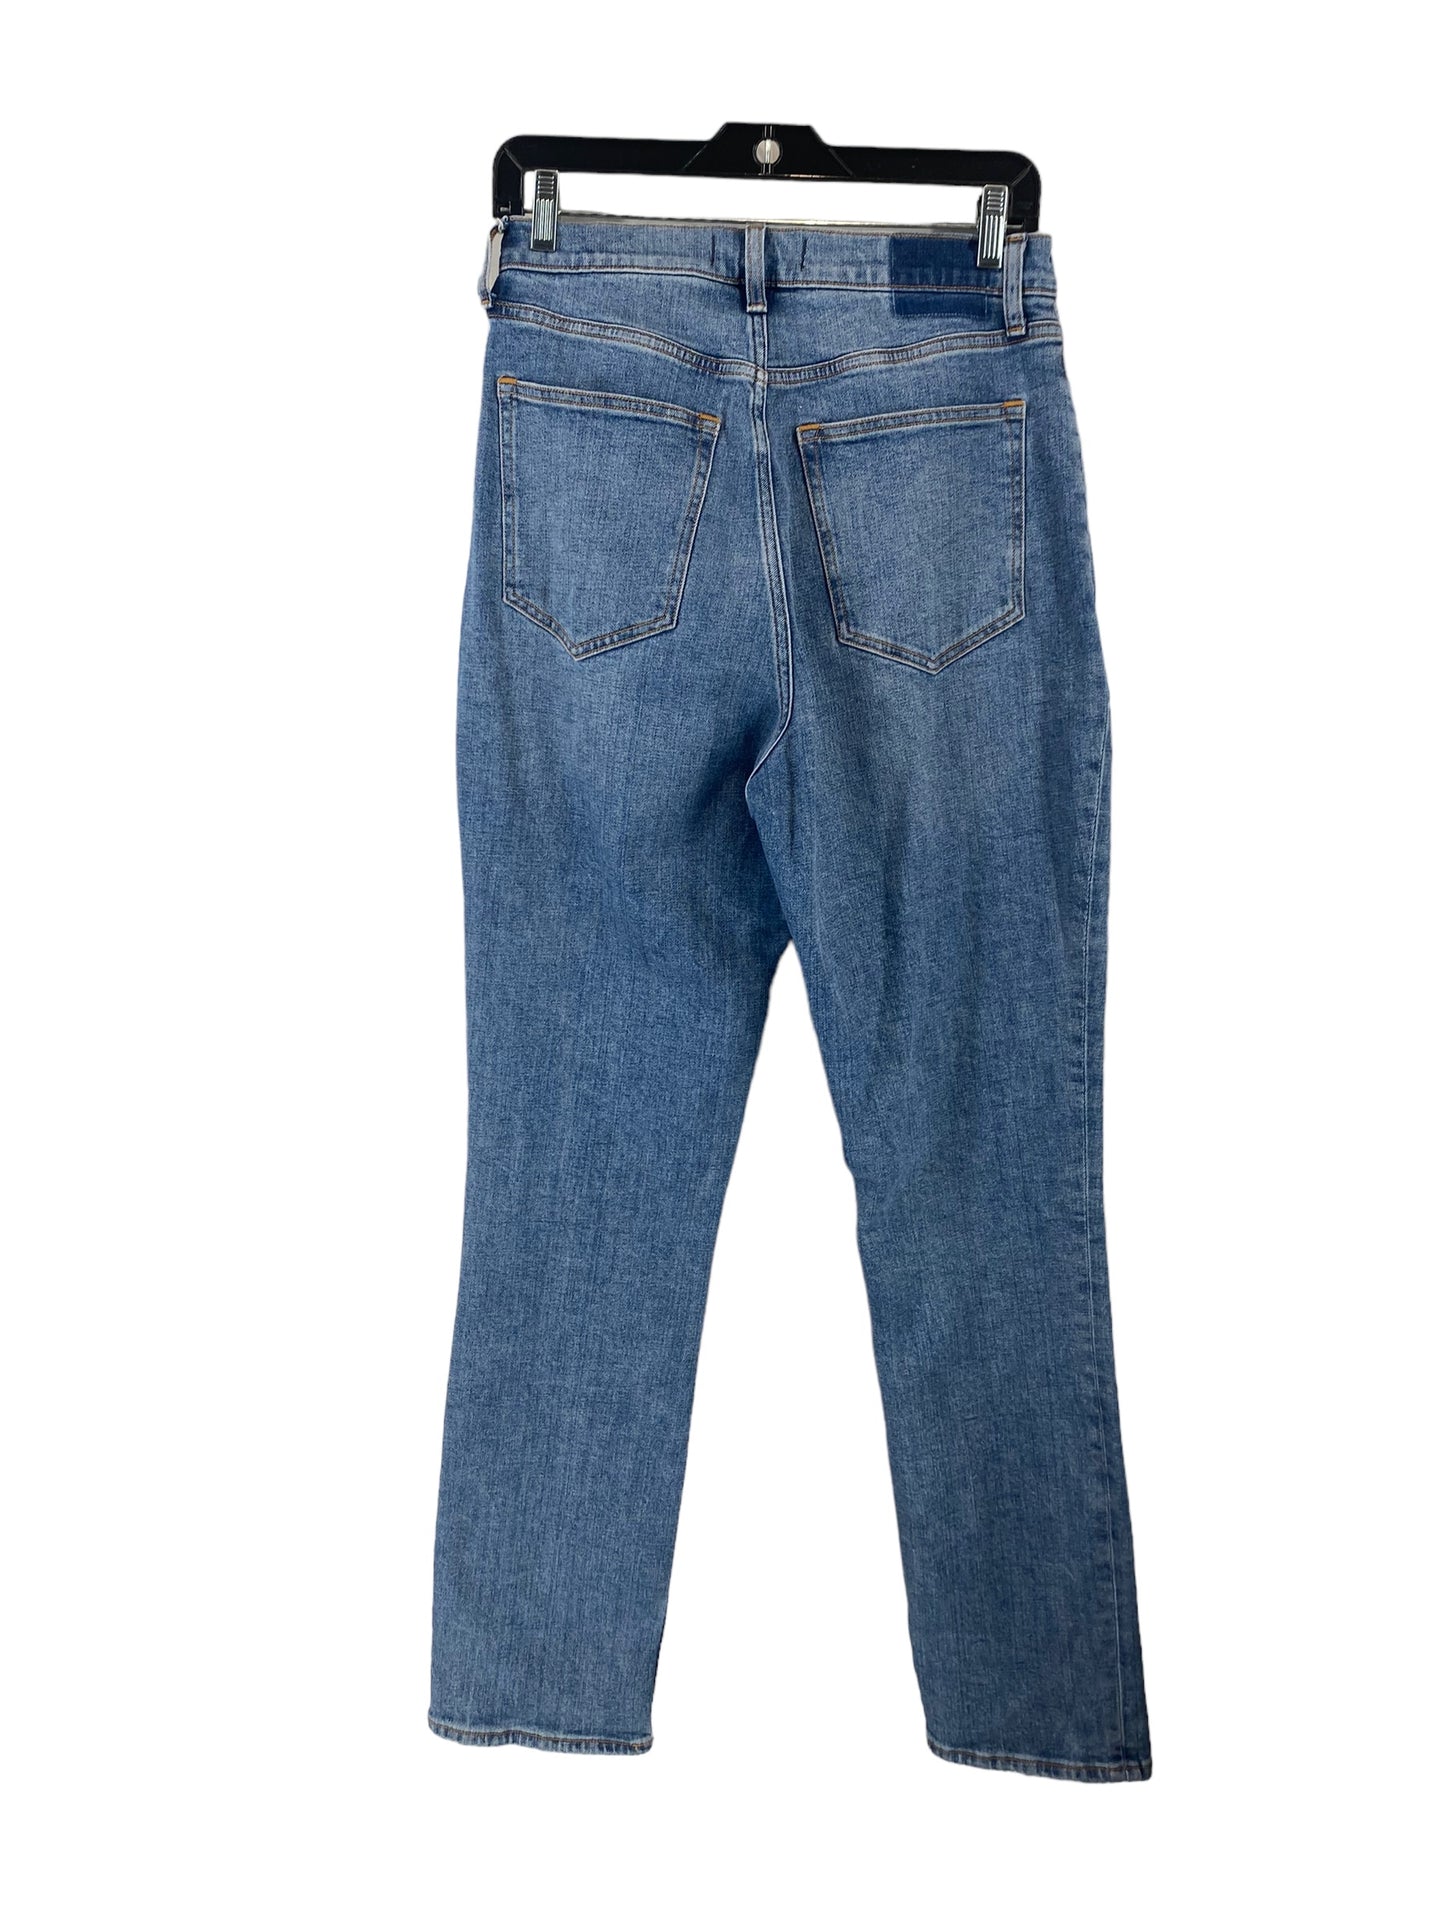 Jeans Straight By Abercrombie And Fitch  Size: 6